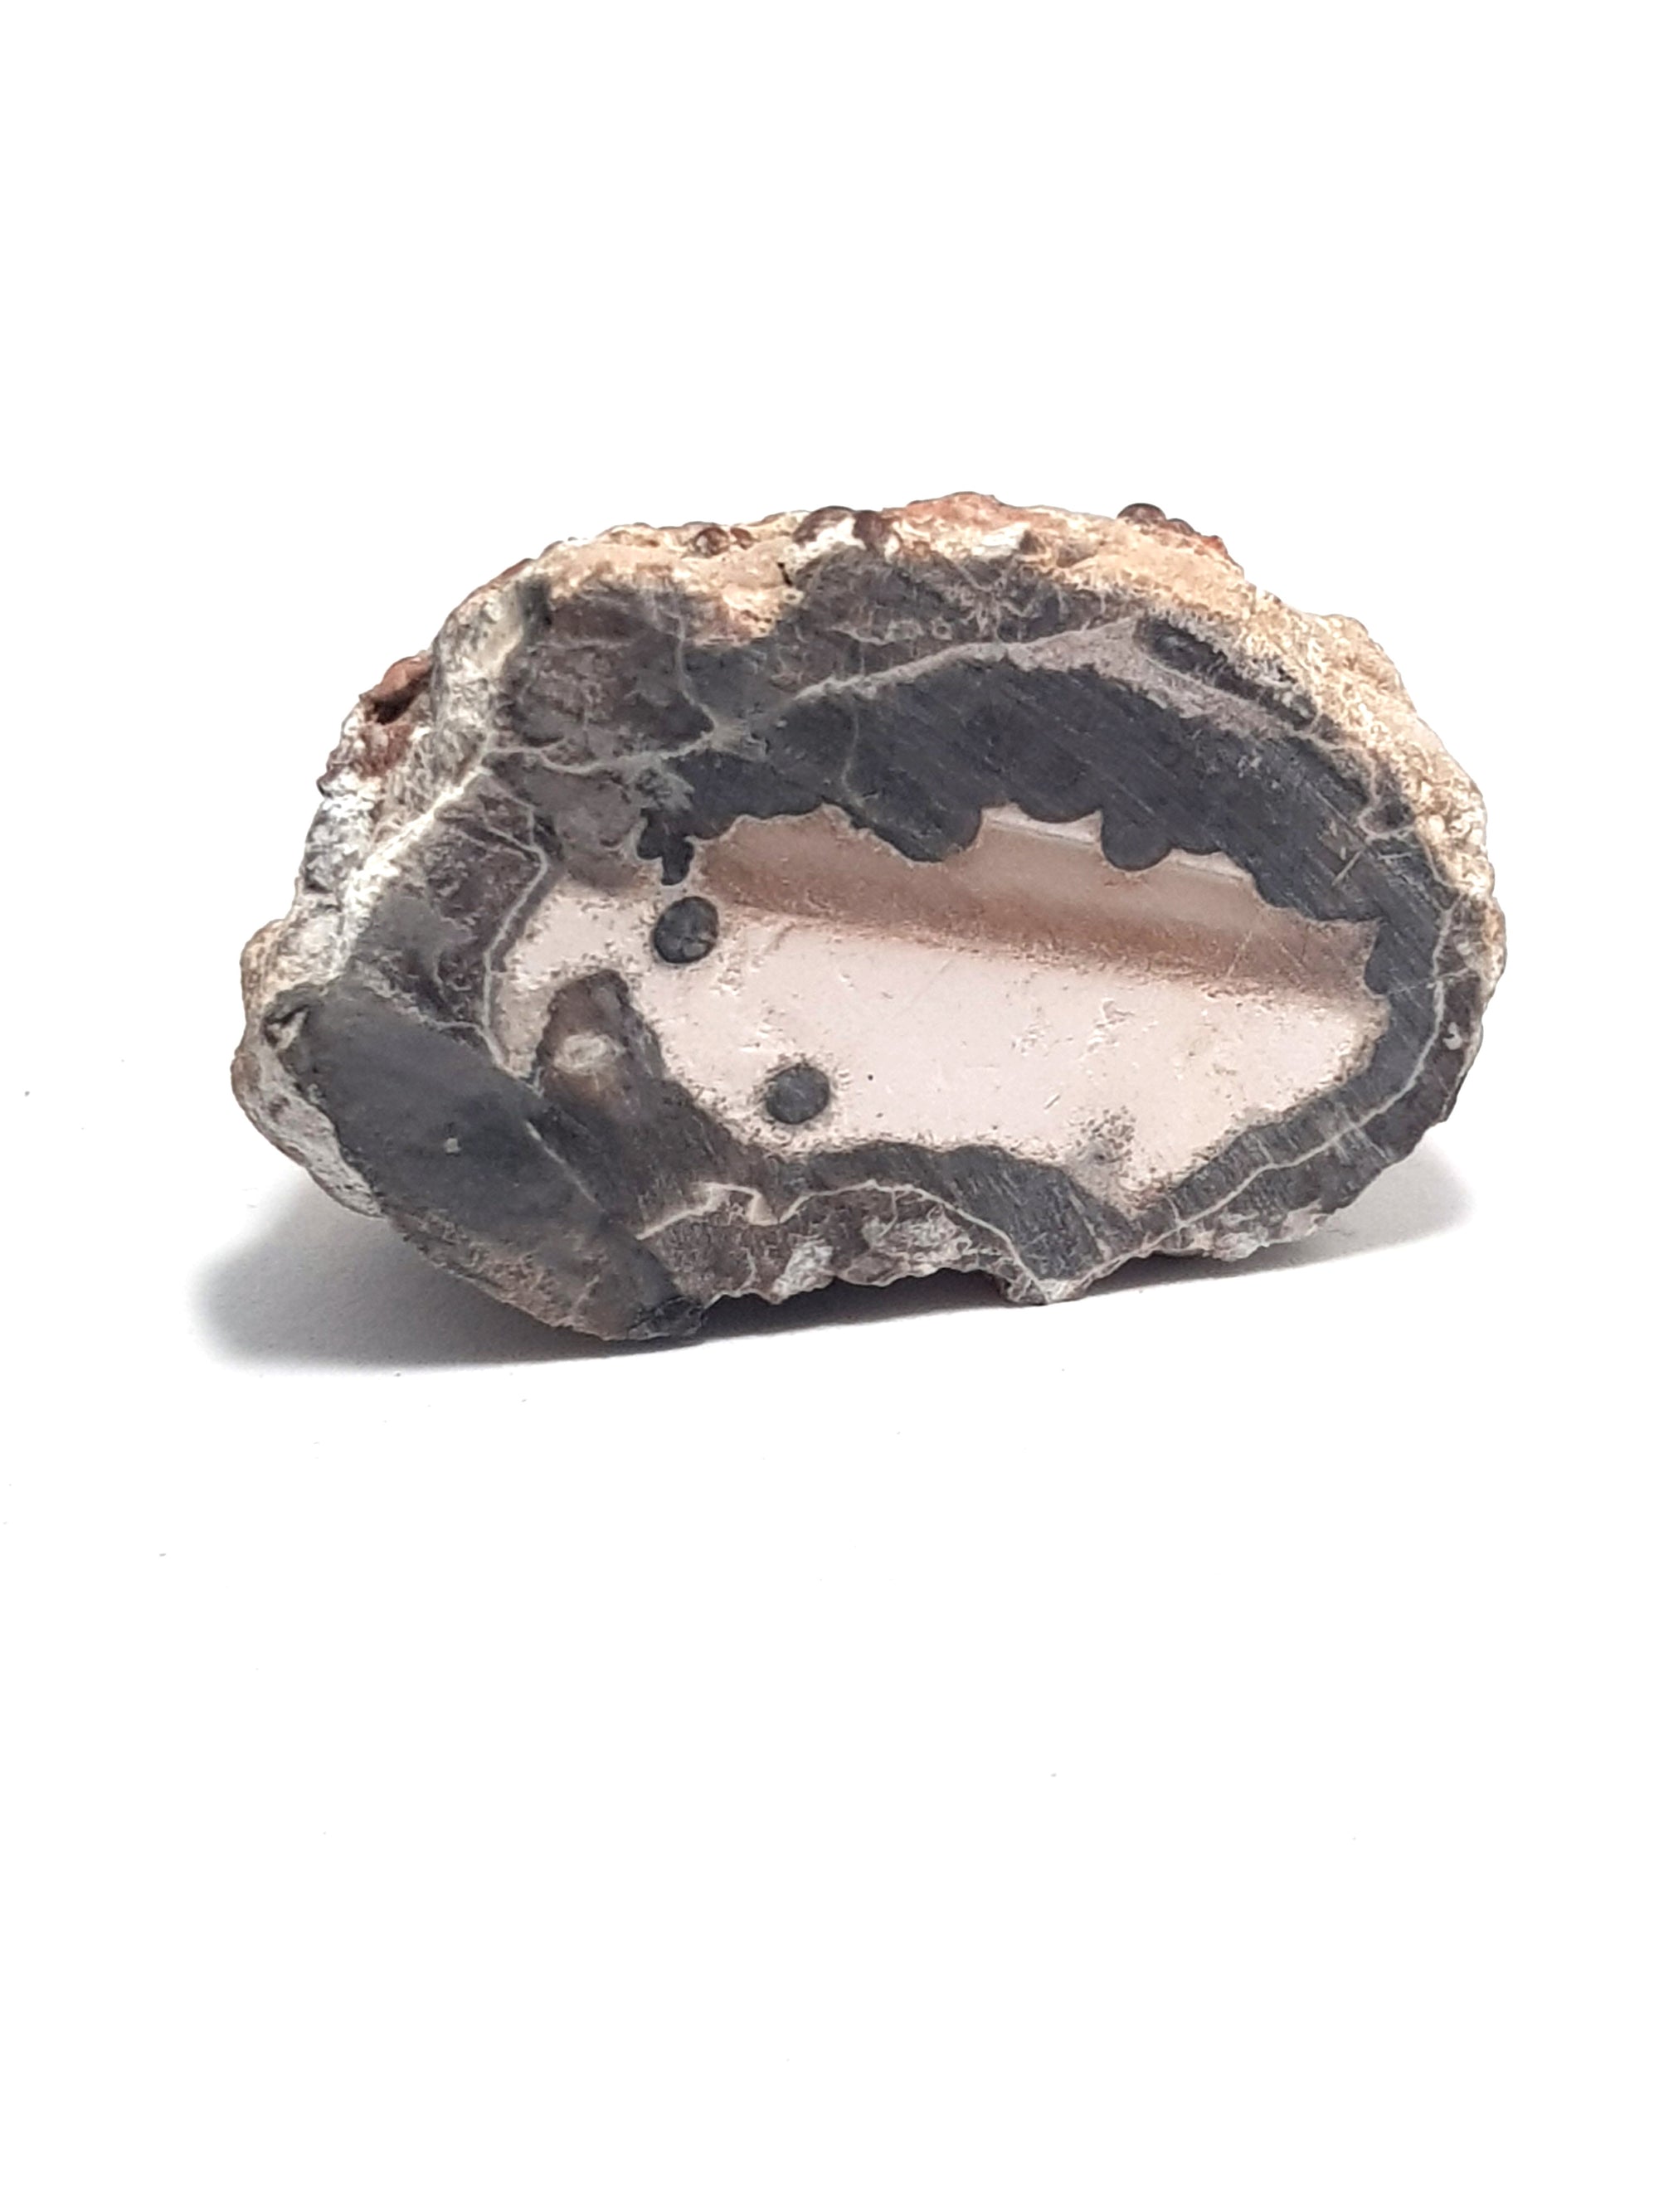 an agate geode cut open to show the pattern inside. The inside consists of a think brown rim, the interior is light pink with a darker pink band in the middle